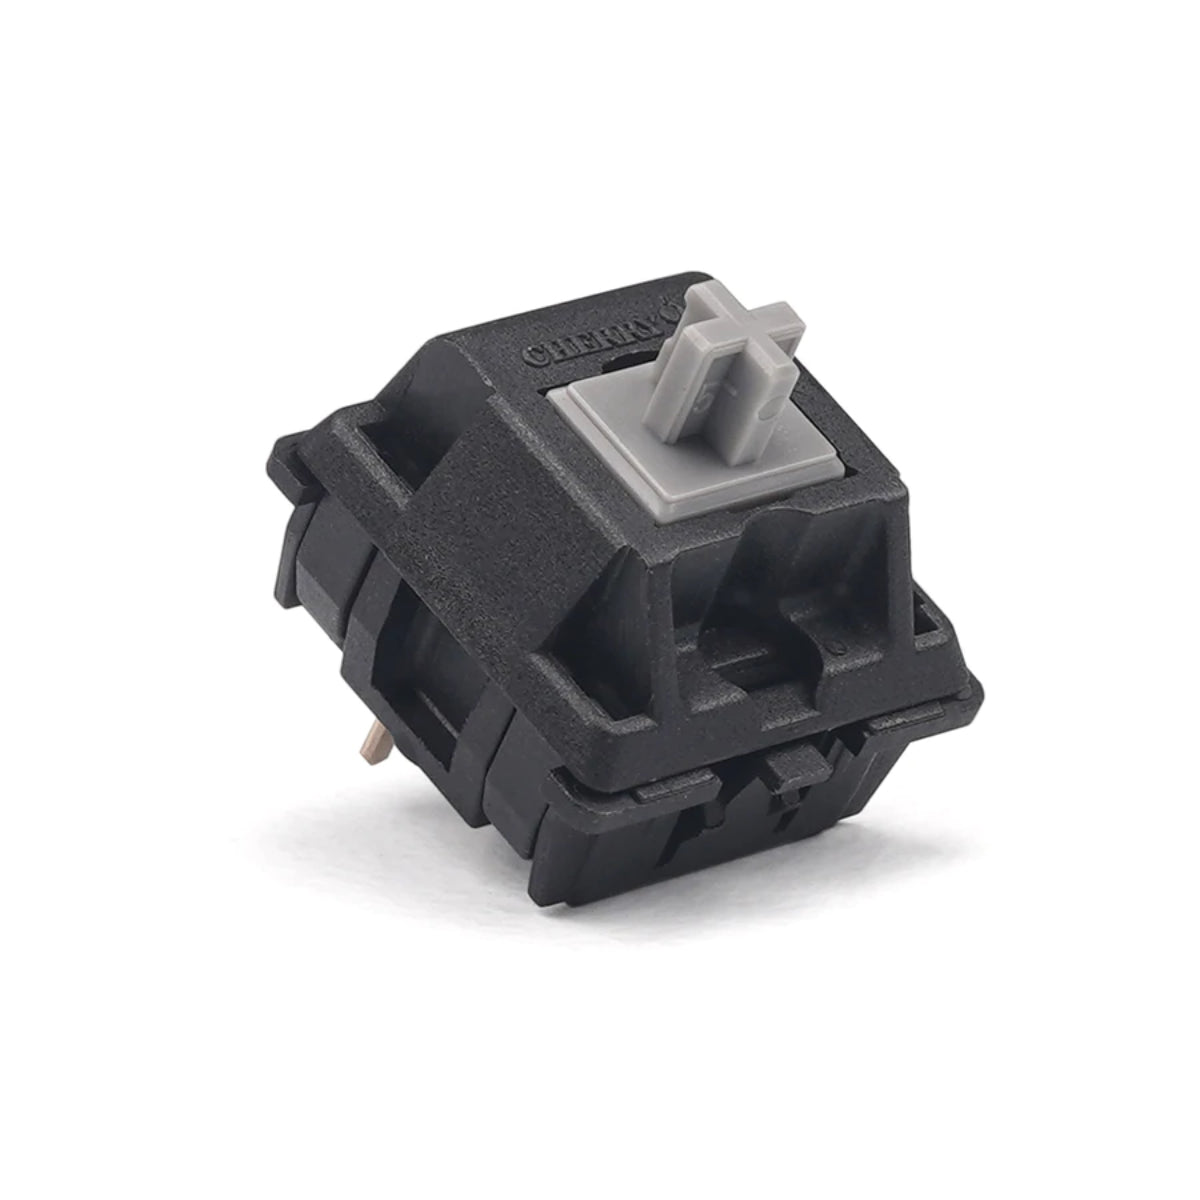 KBD Fans Cherry MX Hyperglide Switches - Tactile Grey - Store 974 | ستور ٩٧٤